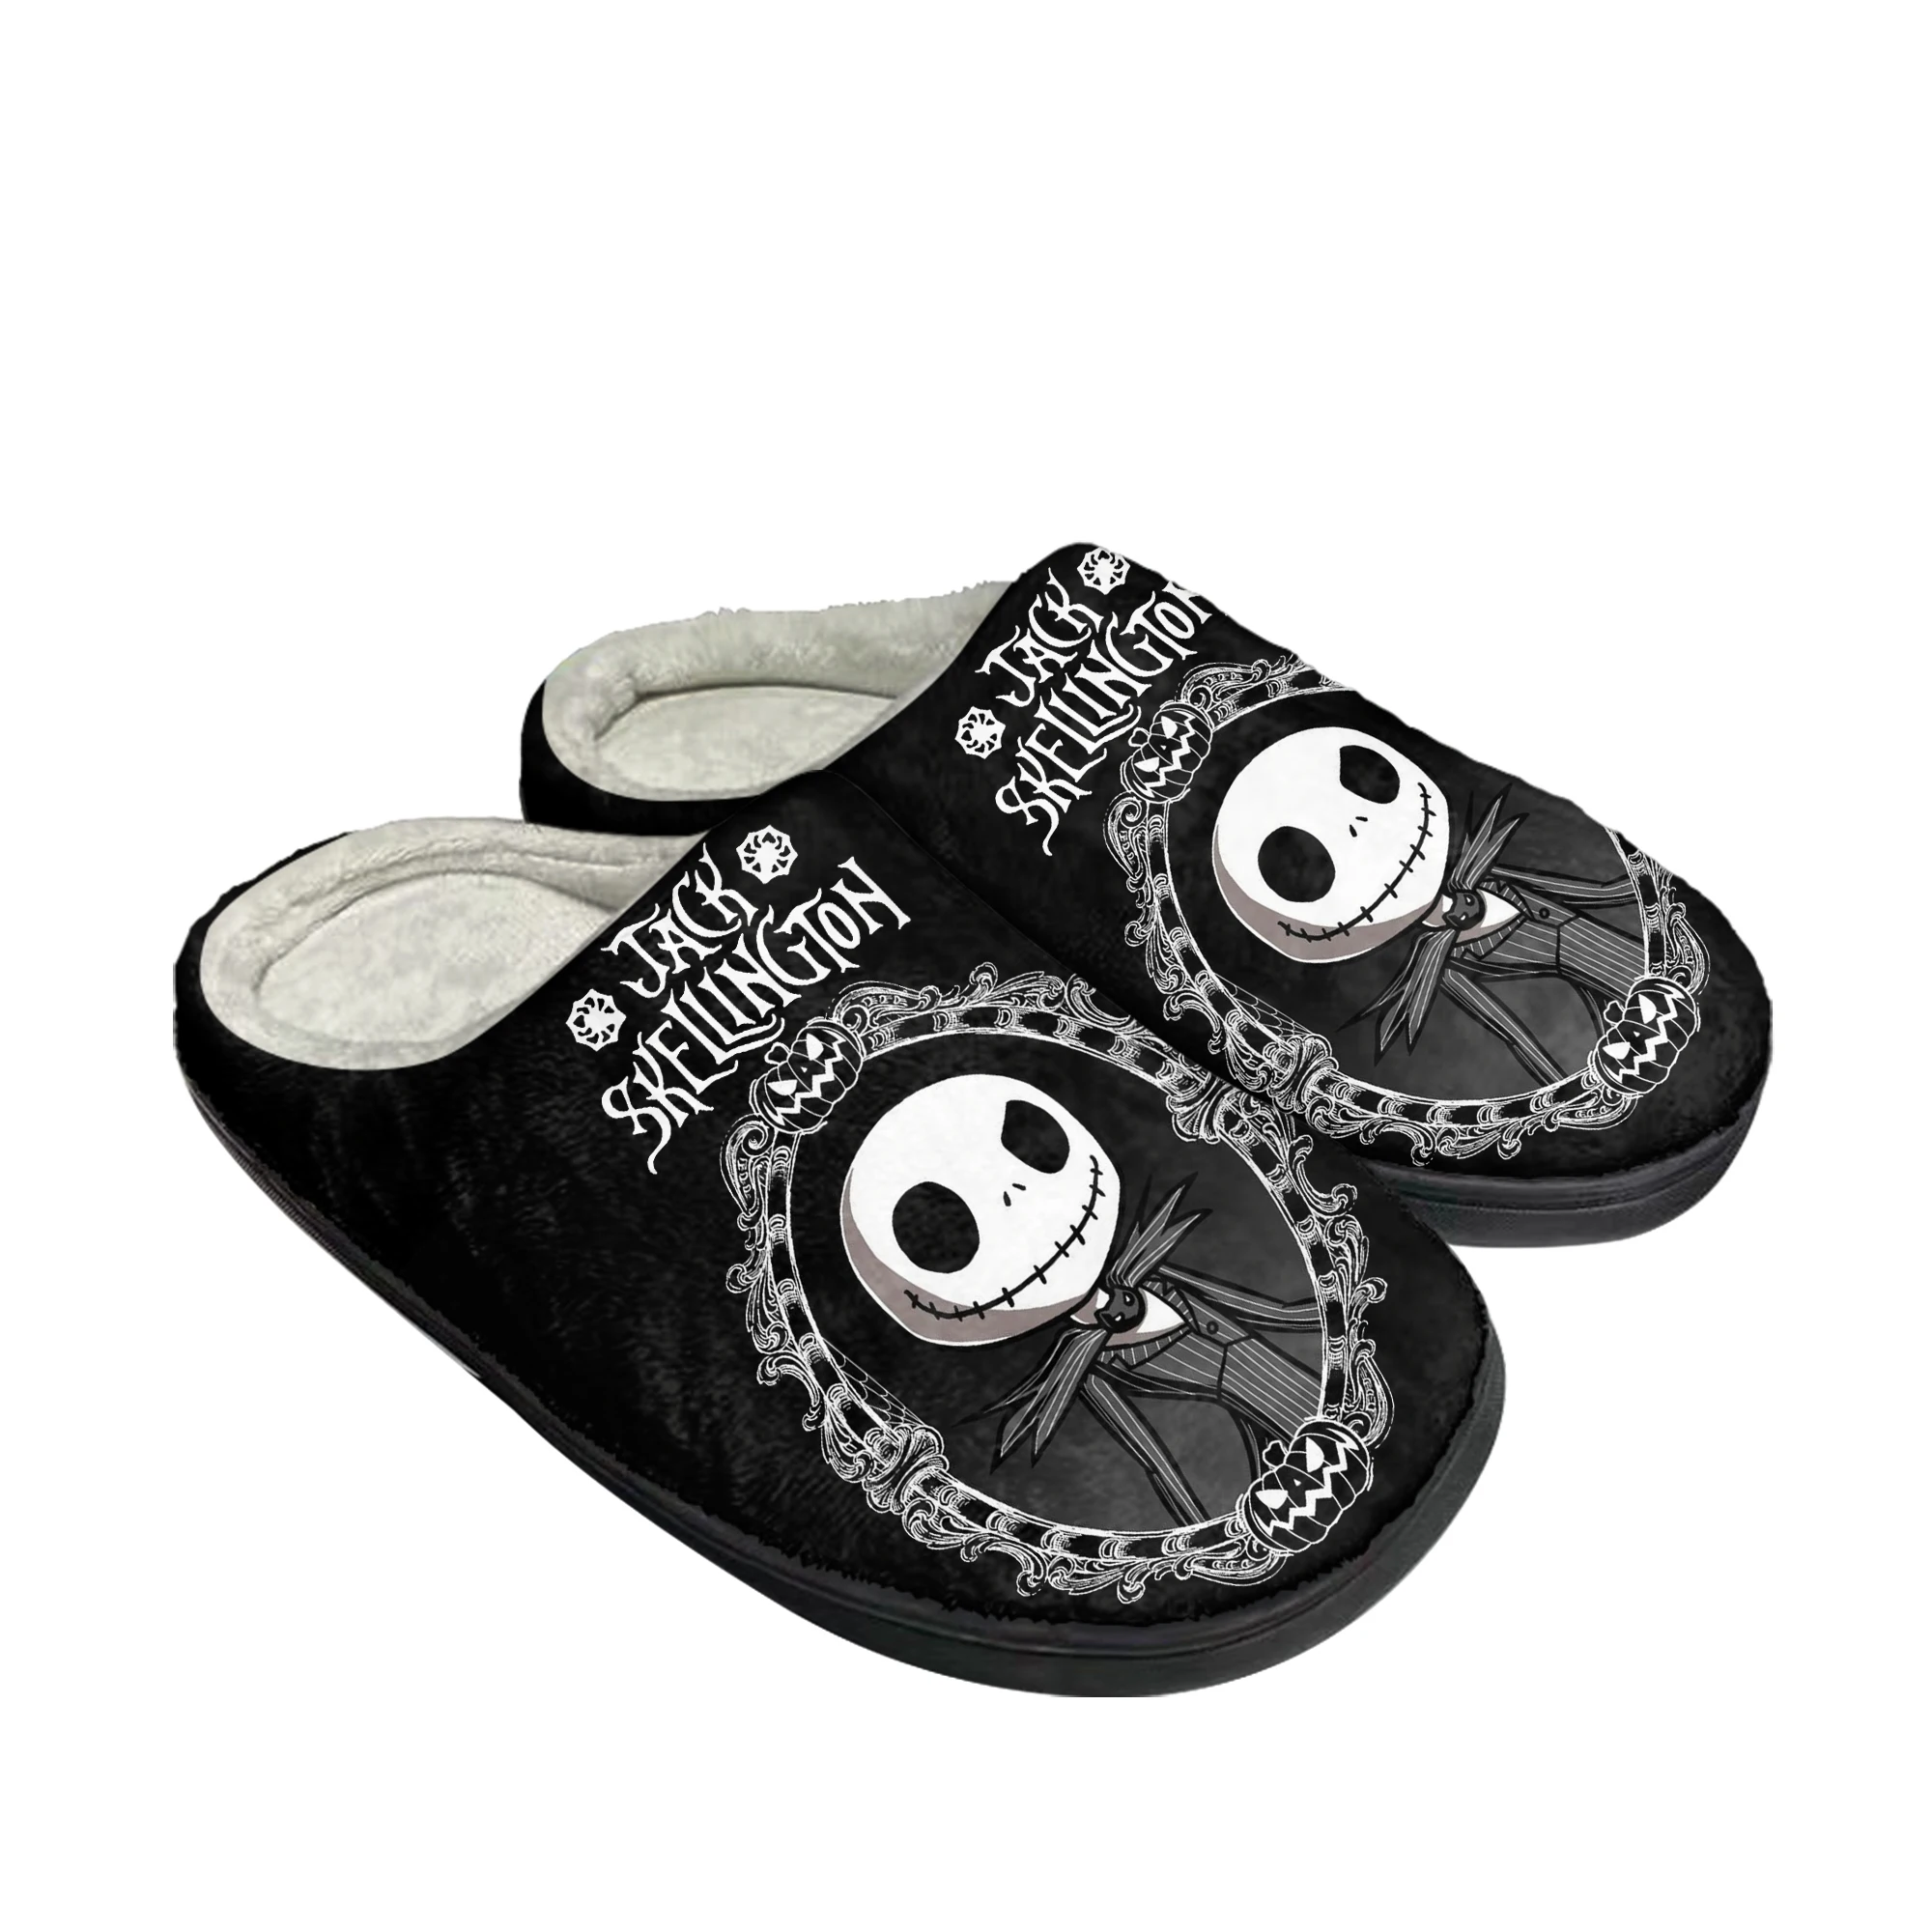 

Nightmare Before Christmas Home Cotton Custom Slippers Mens Womens Sandals Plush Bedroom Casual Keep Warm Shoes Thermal Slipper